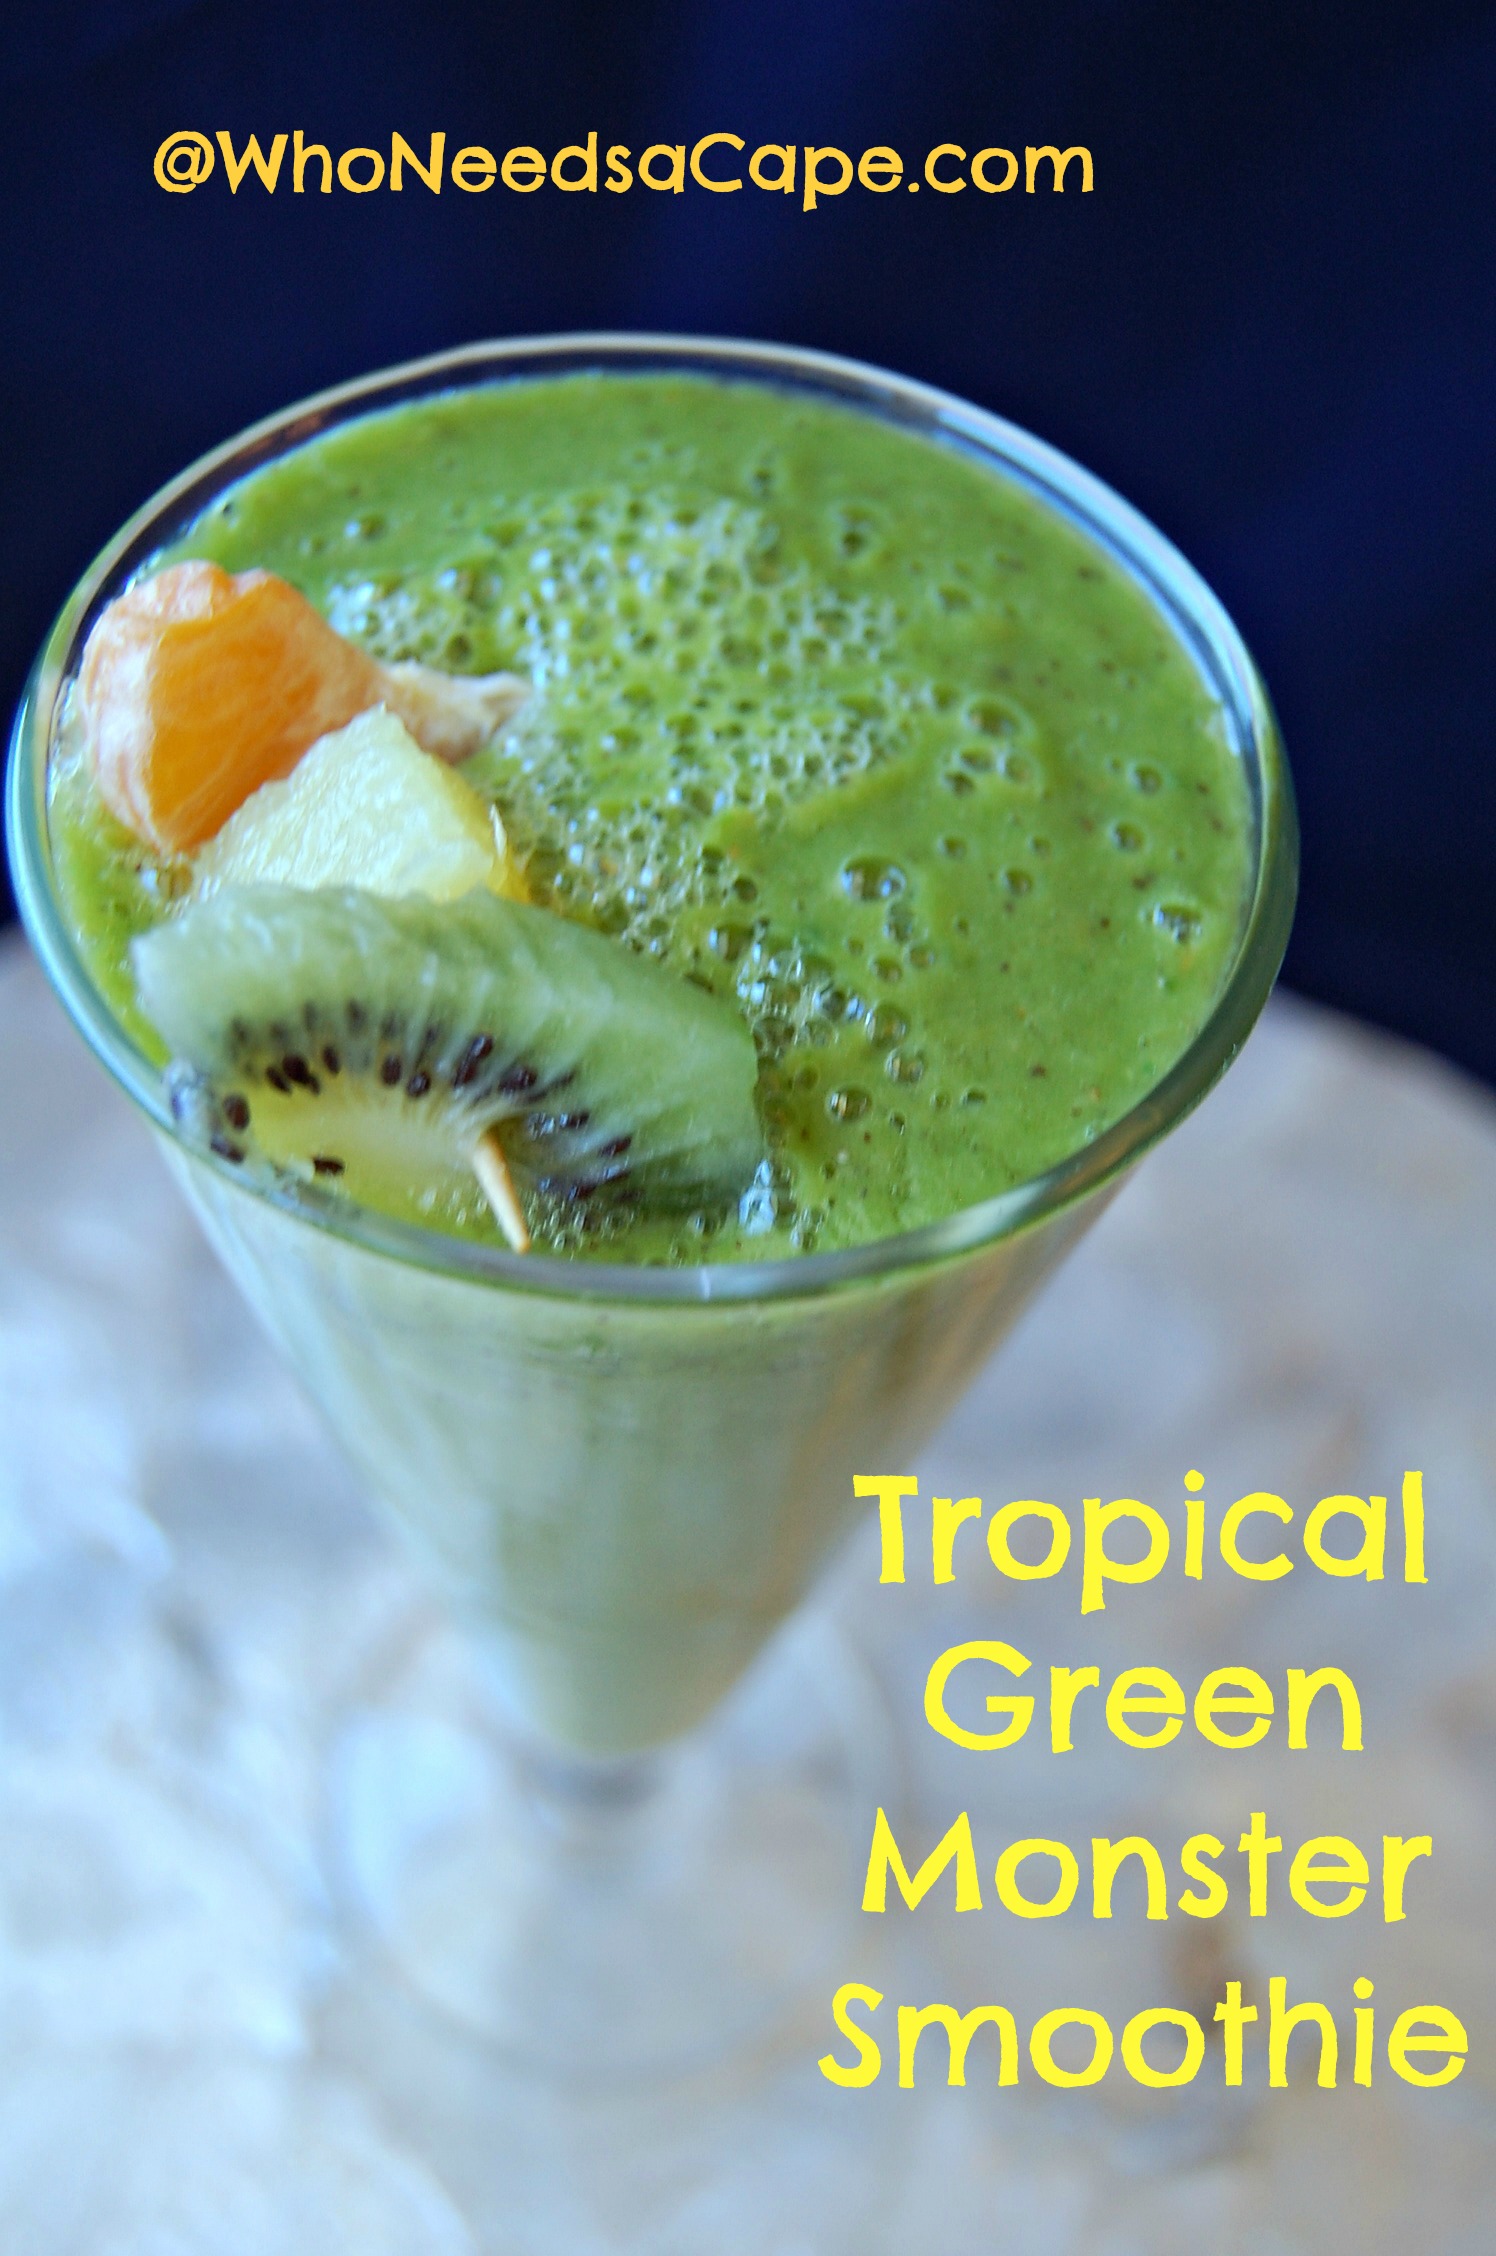 Tropical Green Monster Smoothie - Who Needs A Cape?